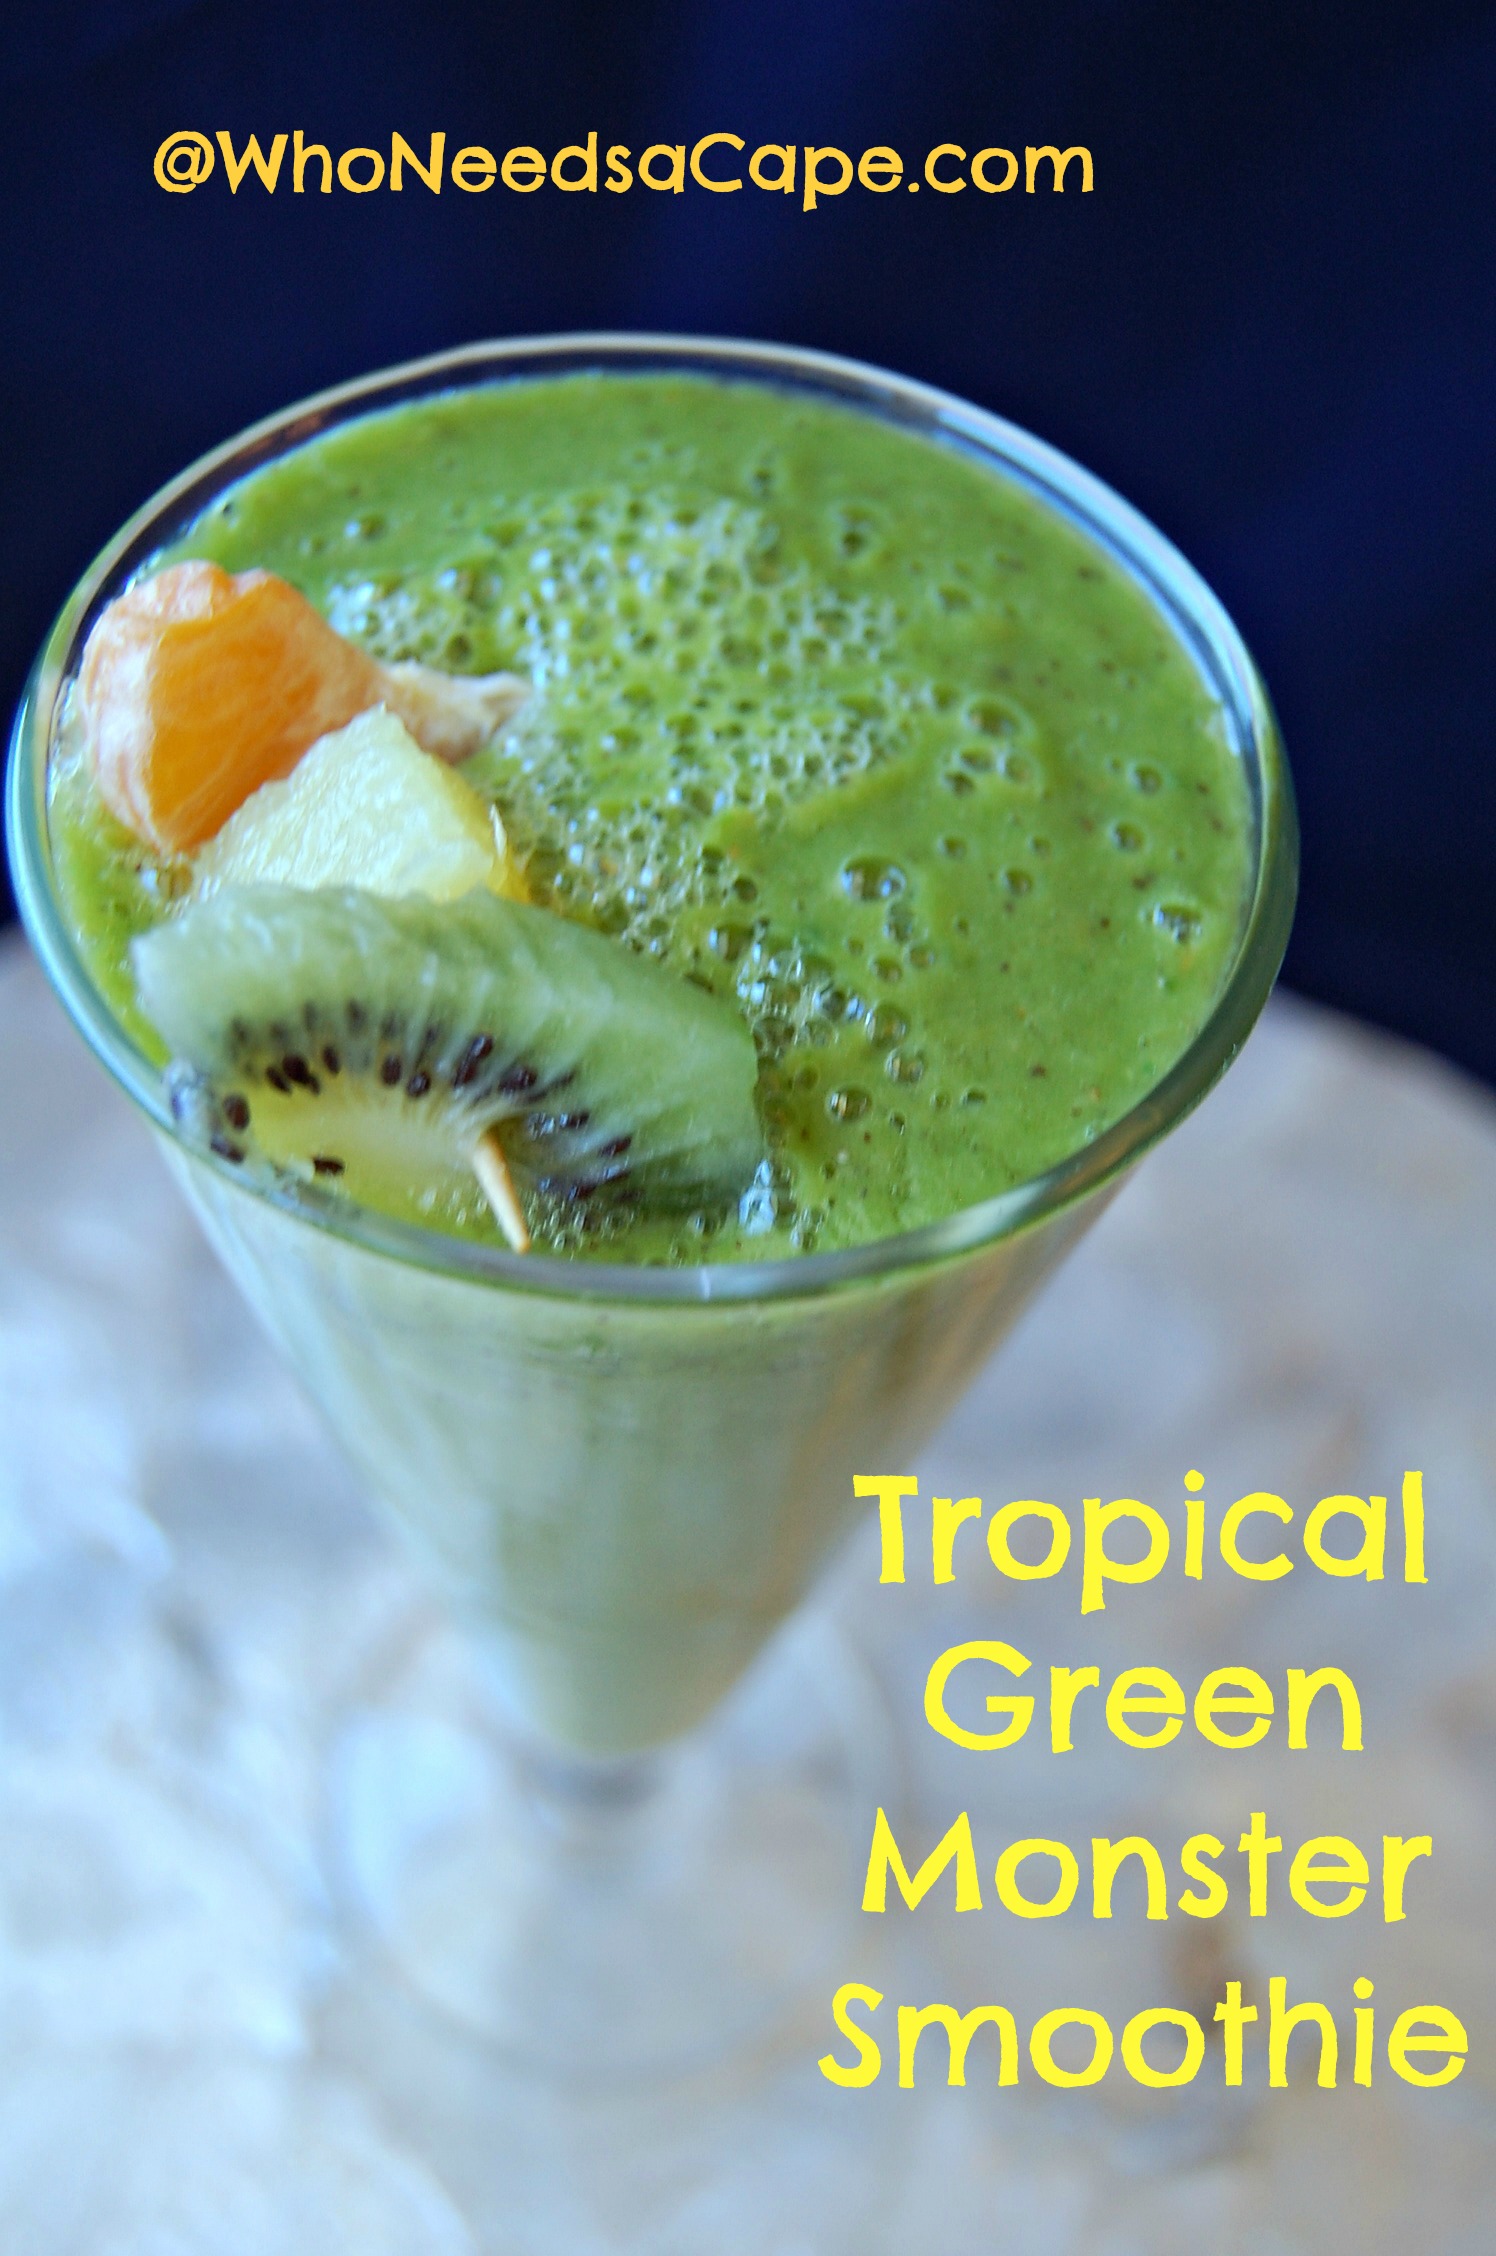 Tropical Green Monster Smoothie - Who Needs A Cape?